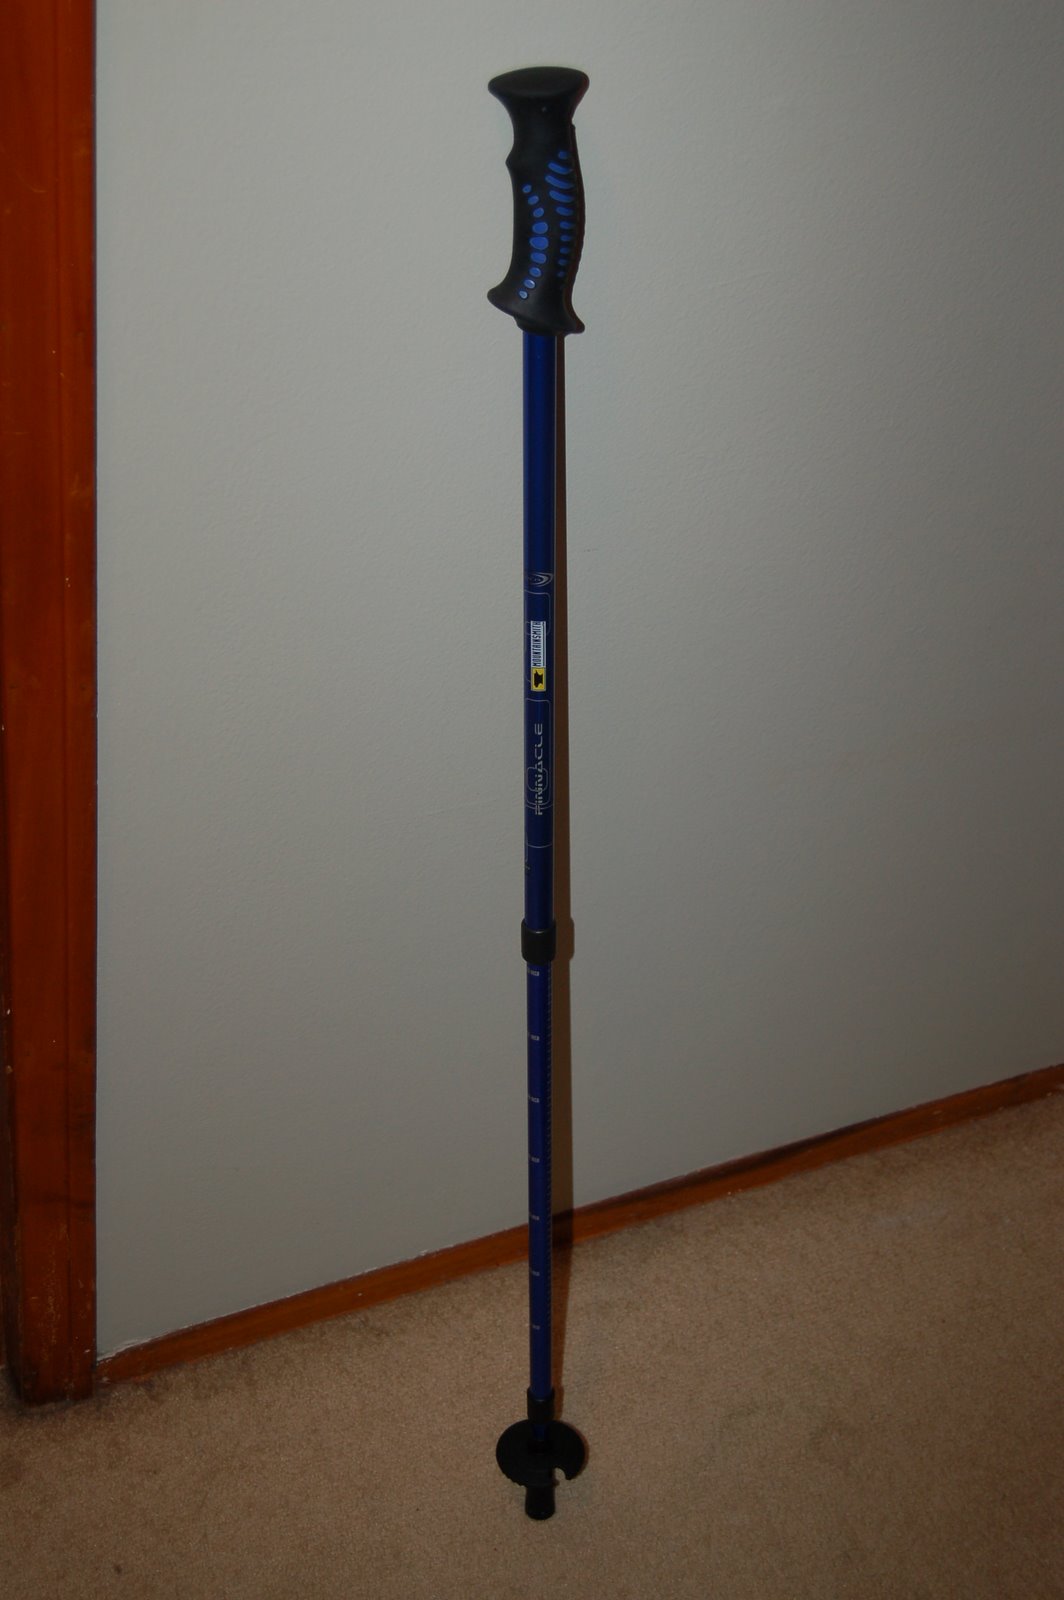 His trekking pole - it's an effort to look like Dr. House.